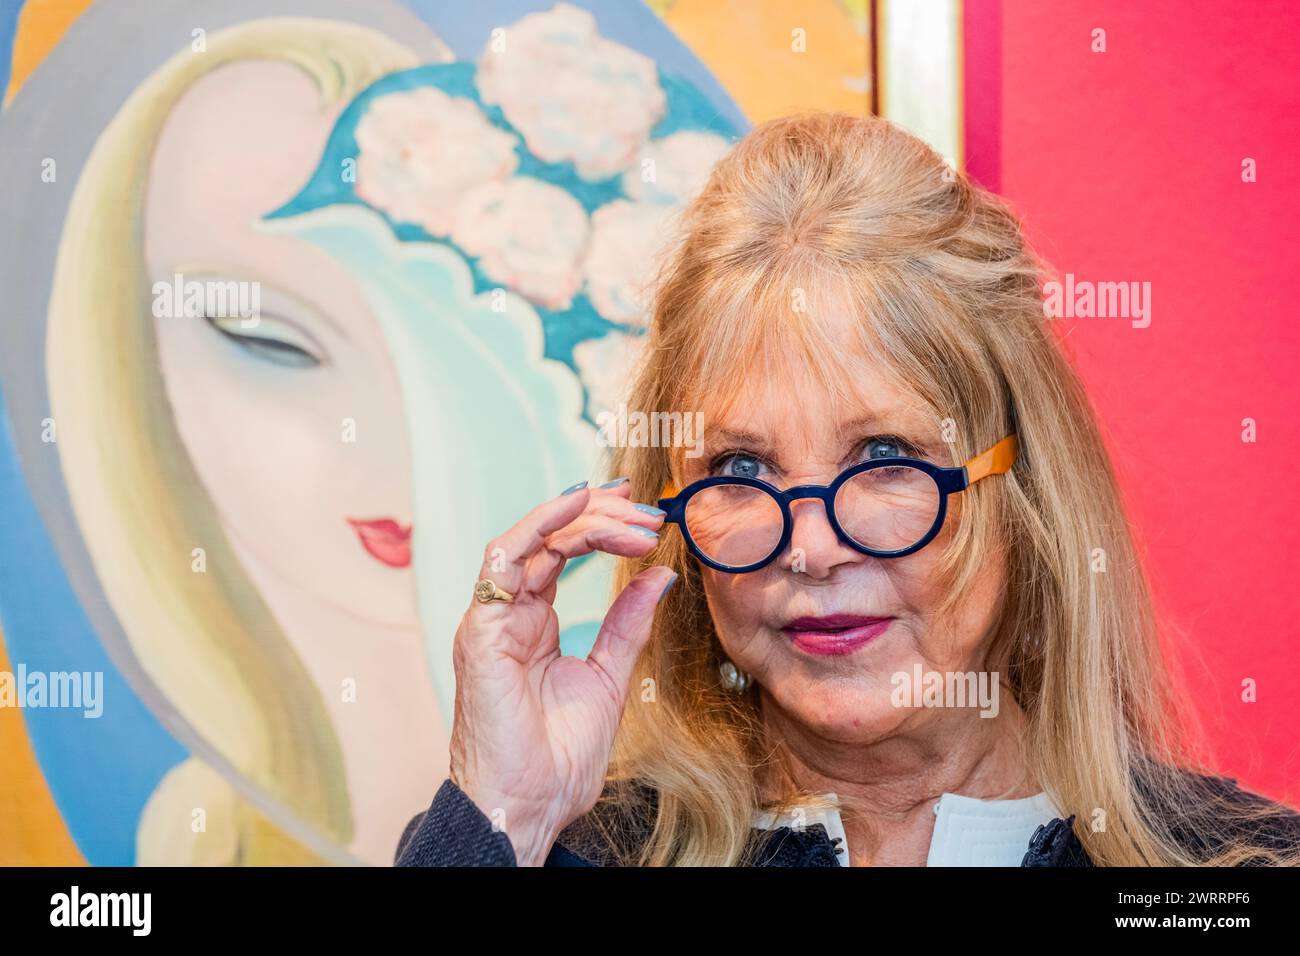 London, UK. 14 Mar 2024. Pattie with the original artwork by E. Frandsen De Schomberg used for the cover of Derek and The Dominos album Layla and Other Assorted Love Songs, (estimate: £40,000-60,000) - A preview of the Pattie Boyd Collection Sale at Christies in London. She was a model, muse, photographer, and icon and the sale includes original album cover artwork and handwritten lyrics alongside love letters, drawings, photographs, fashion, jewellery and watches. Estimates range from £300 to £60,000. The online sale closes on 22 March and is on public view from 15 to 21 March. Credit: Guy Be Stock Photo